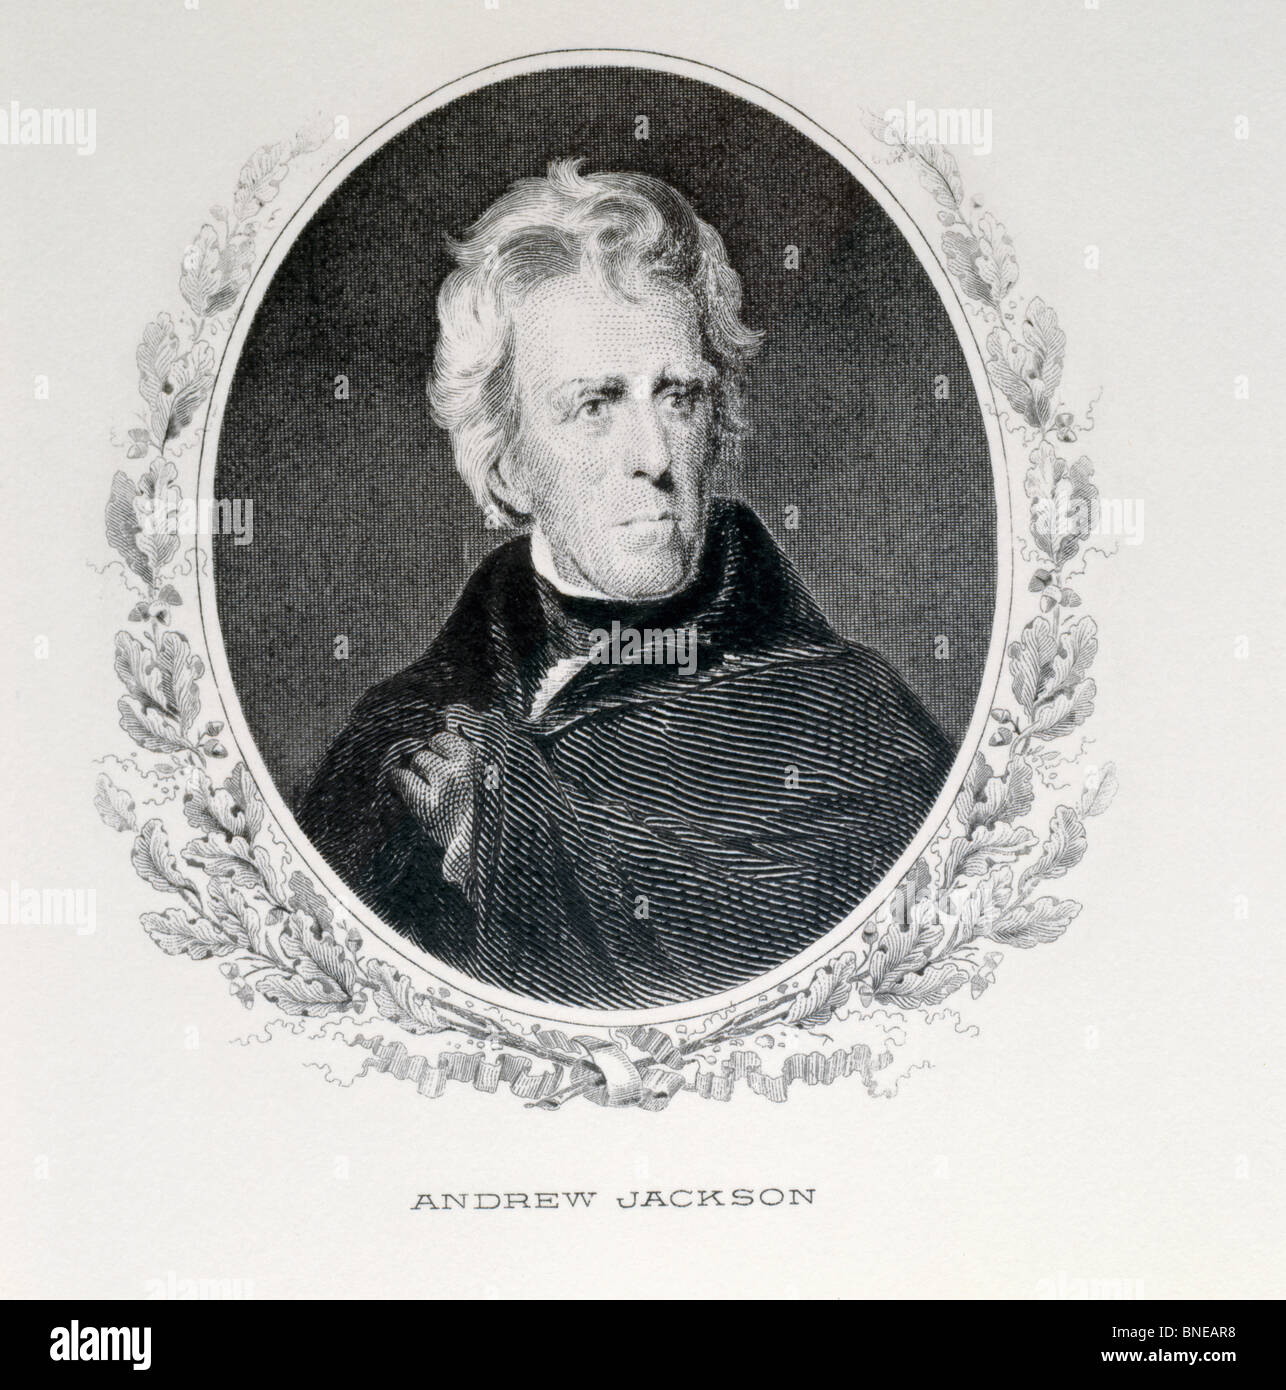 Andrew Jackson, seventh President of United States, engraving, American History Stock Photo